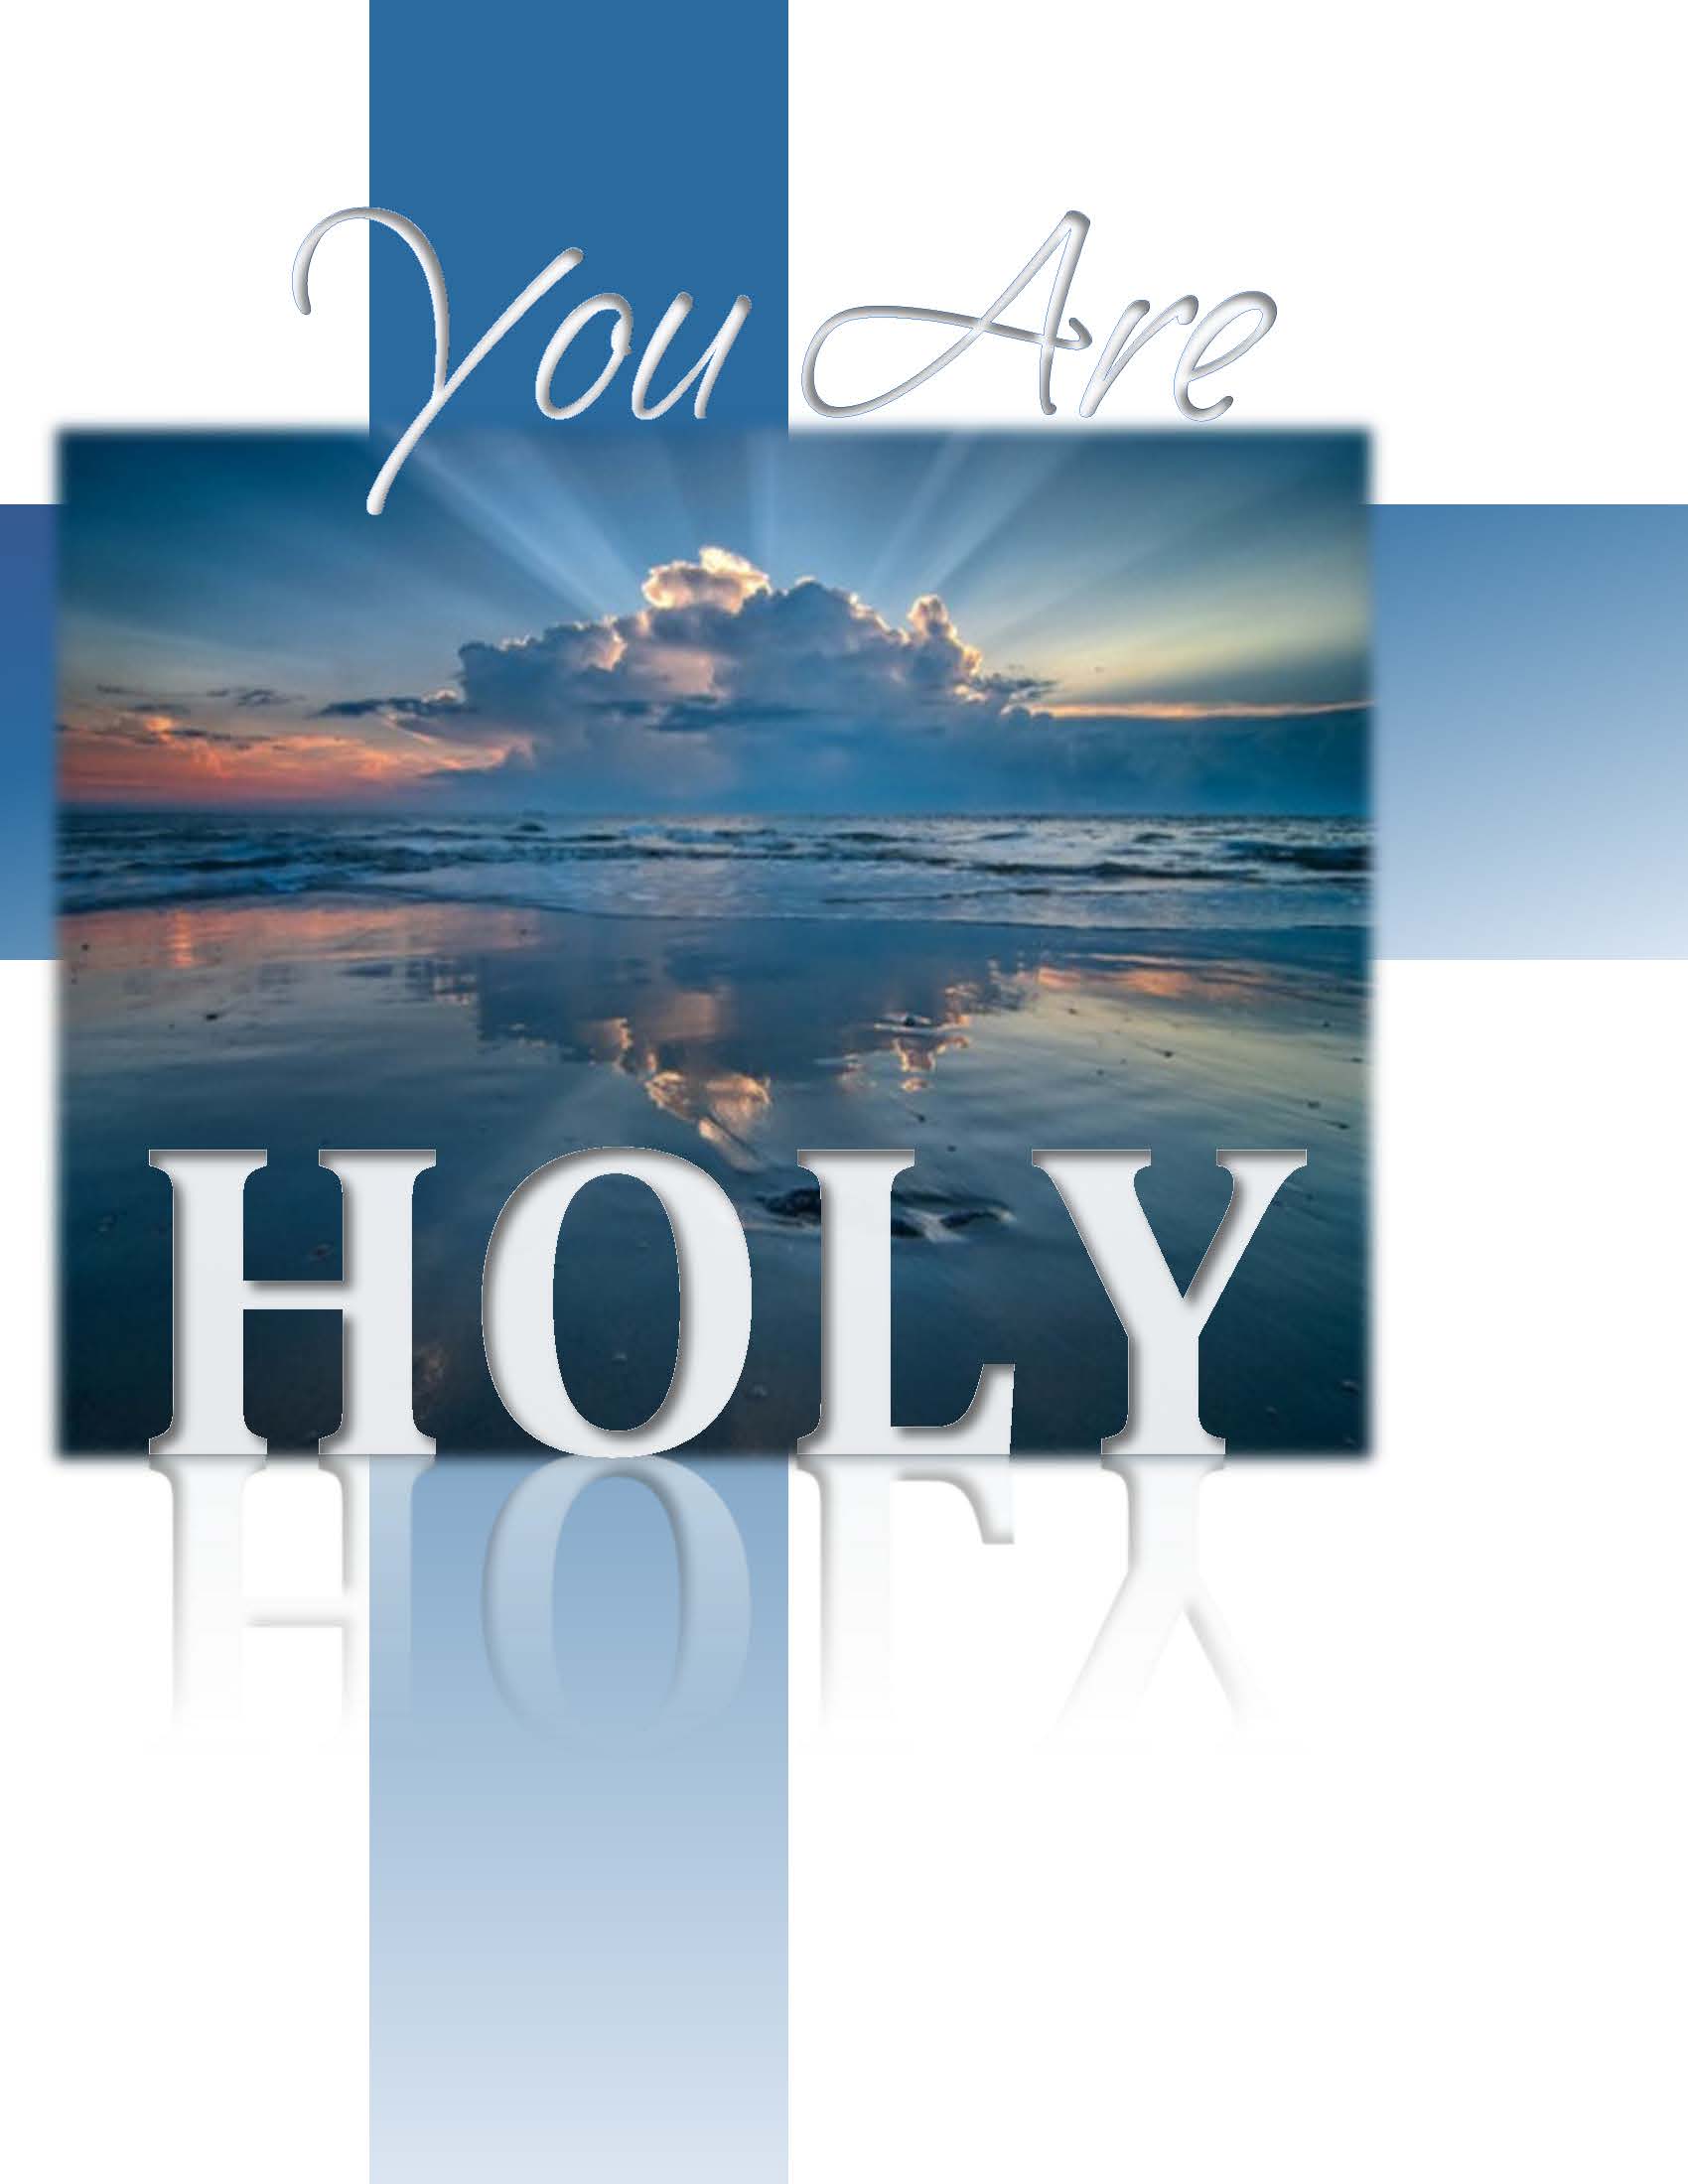 You Are Holy